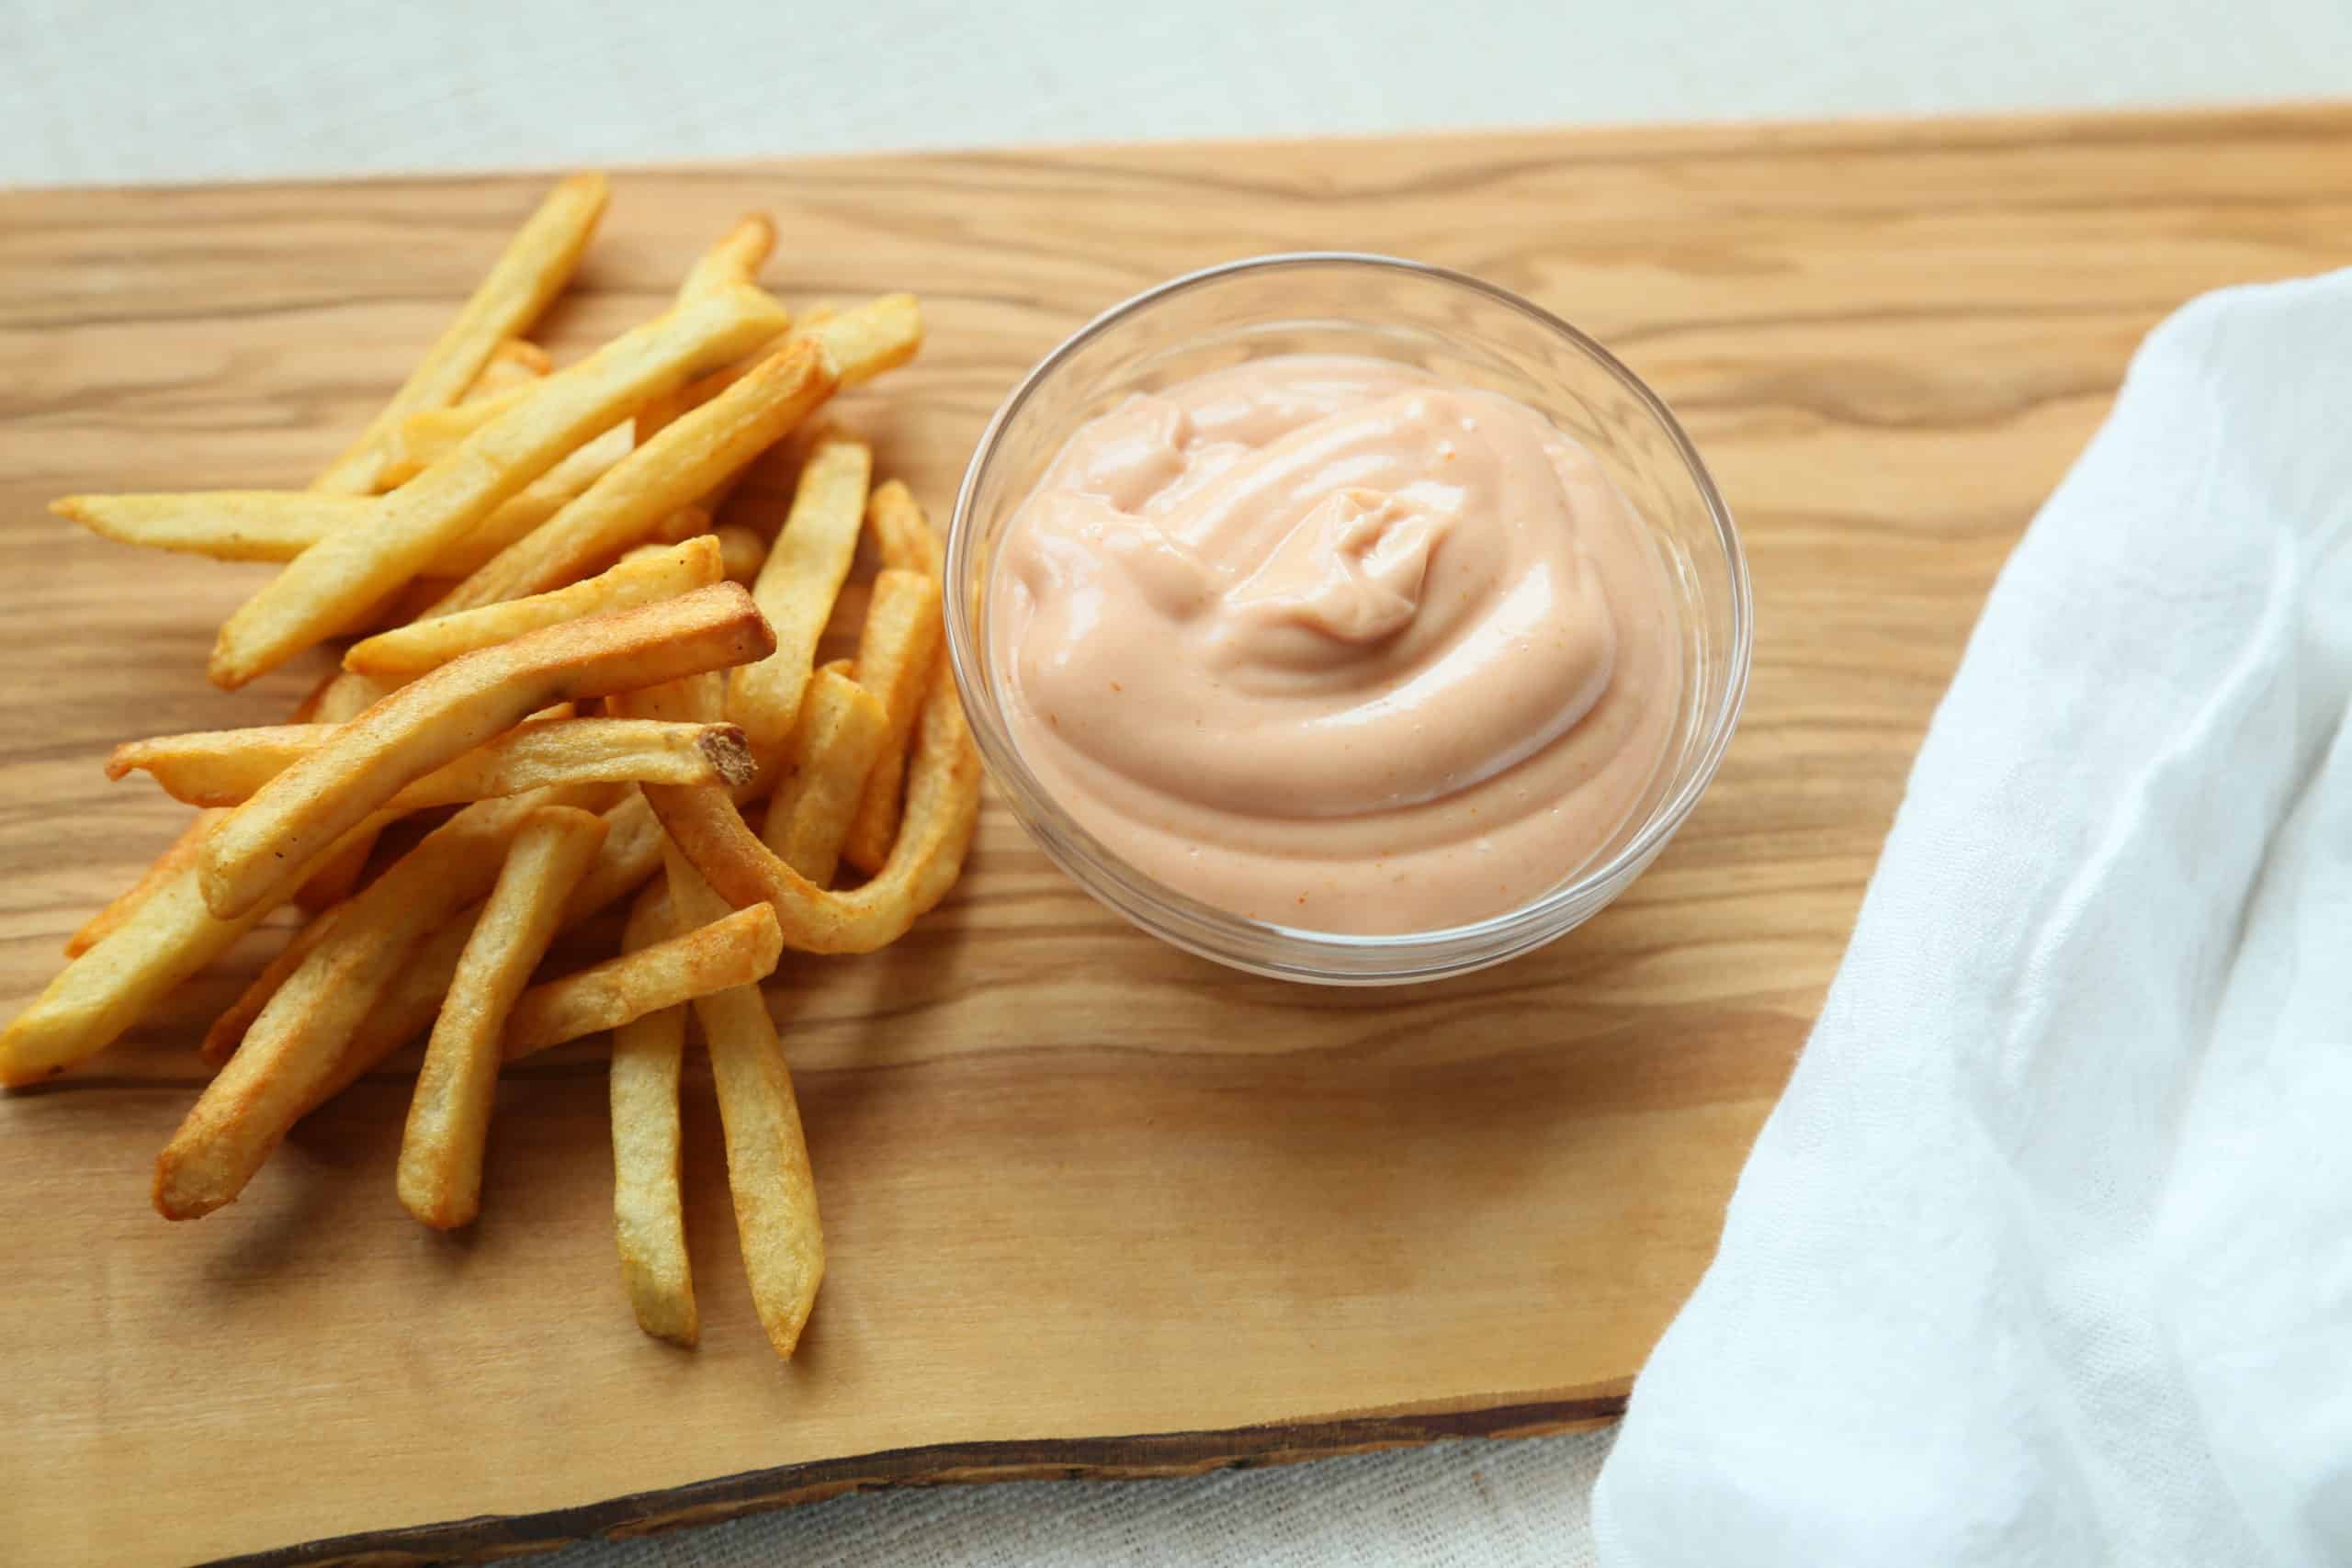 mayo-ketchup-sauce-from-michigan-to-the-table